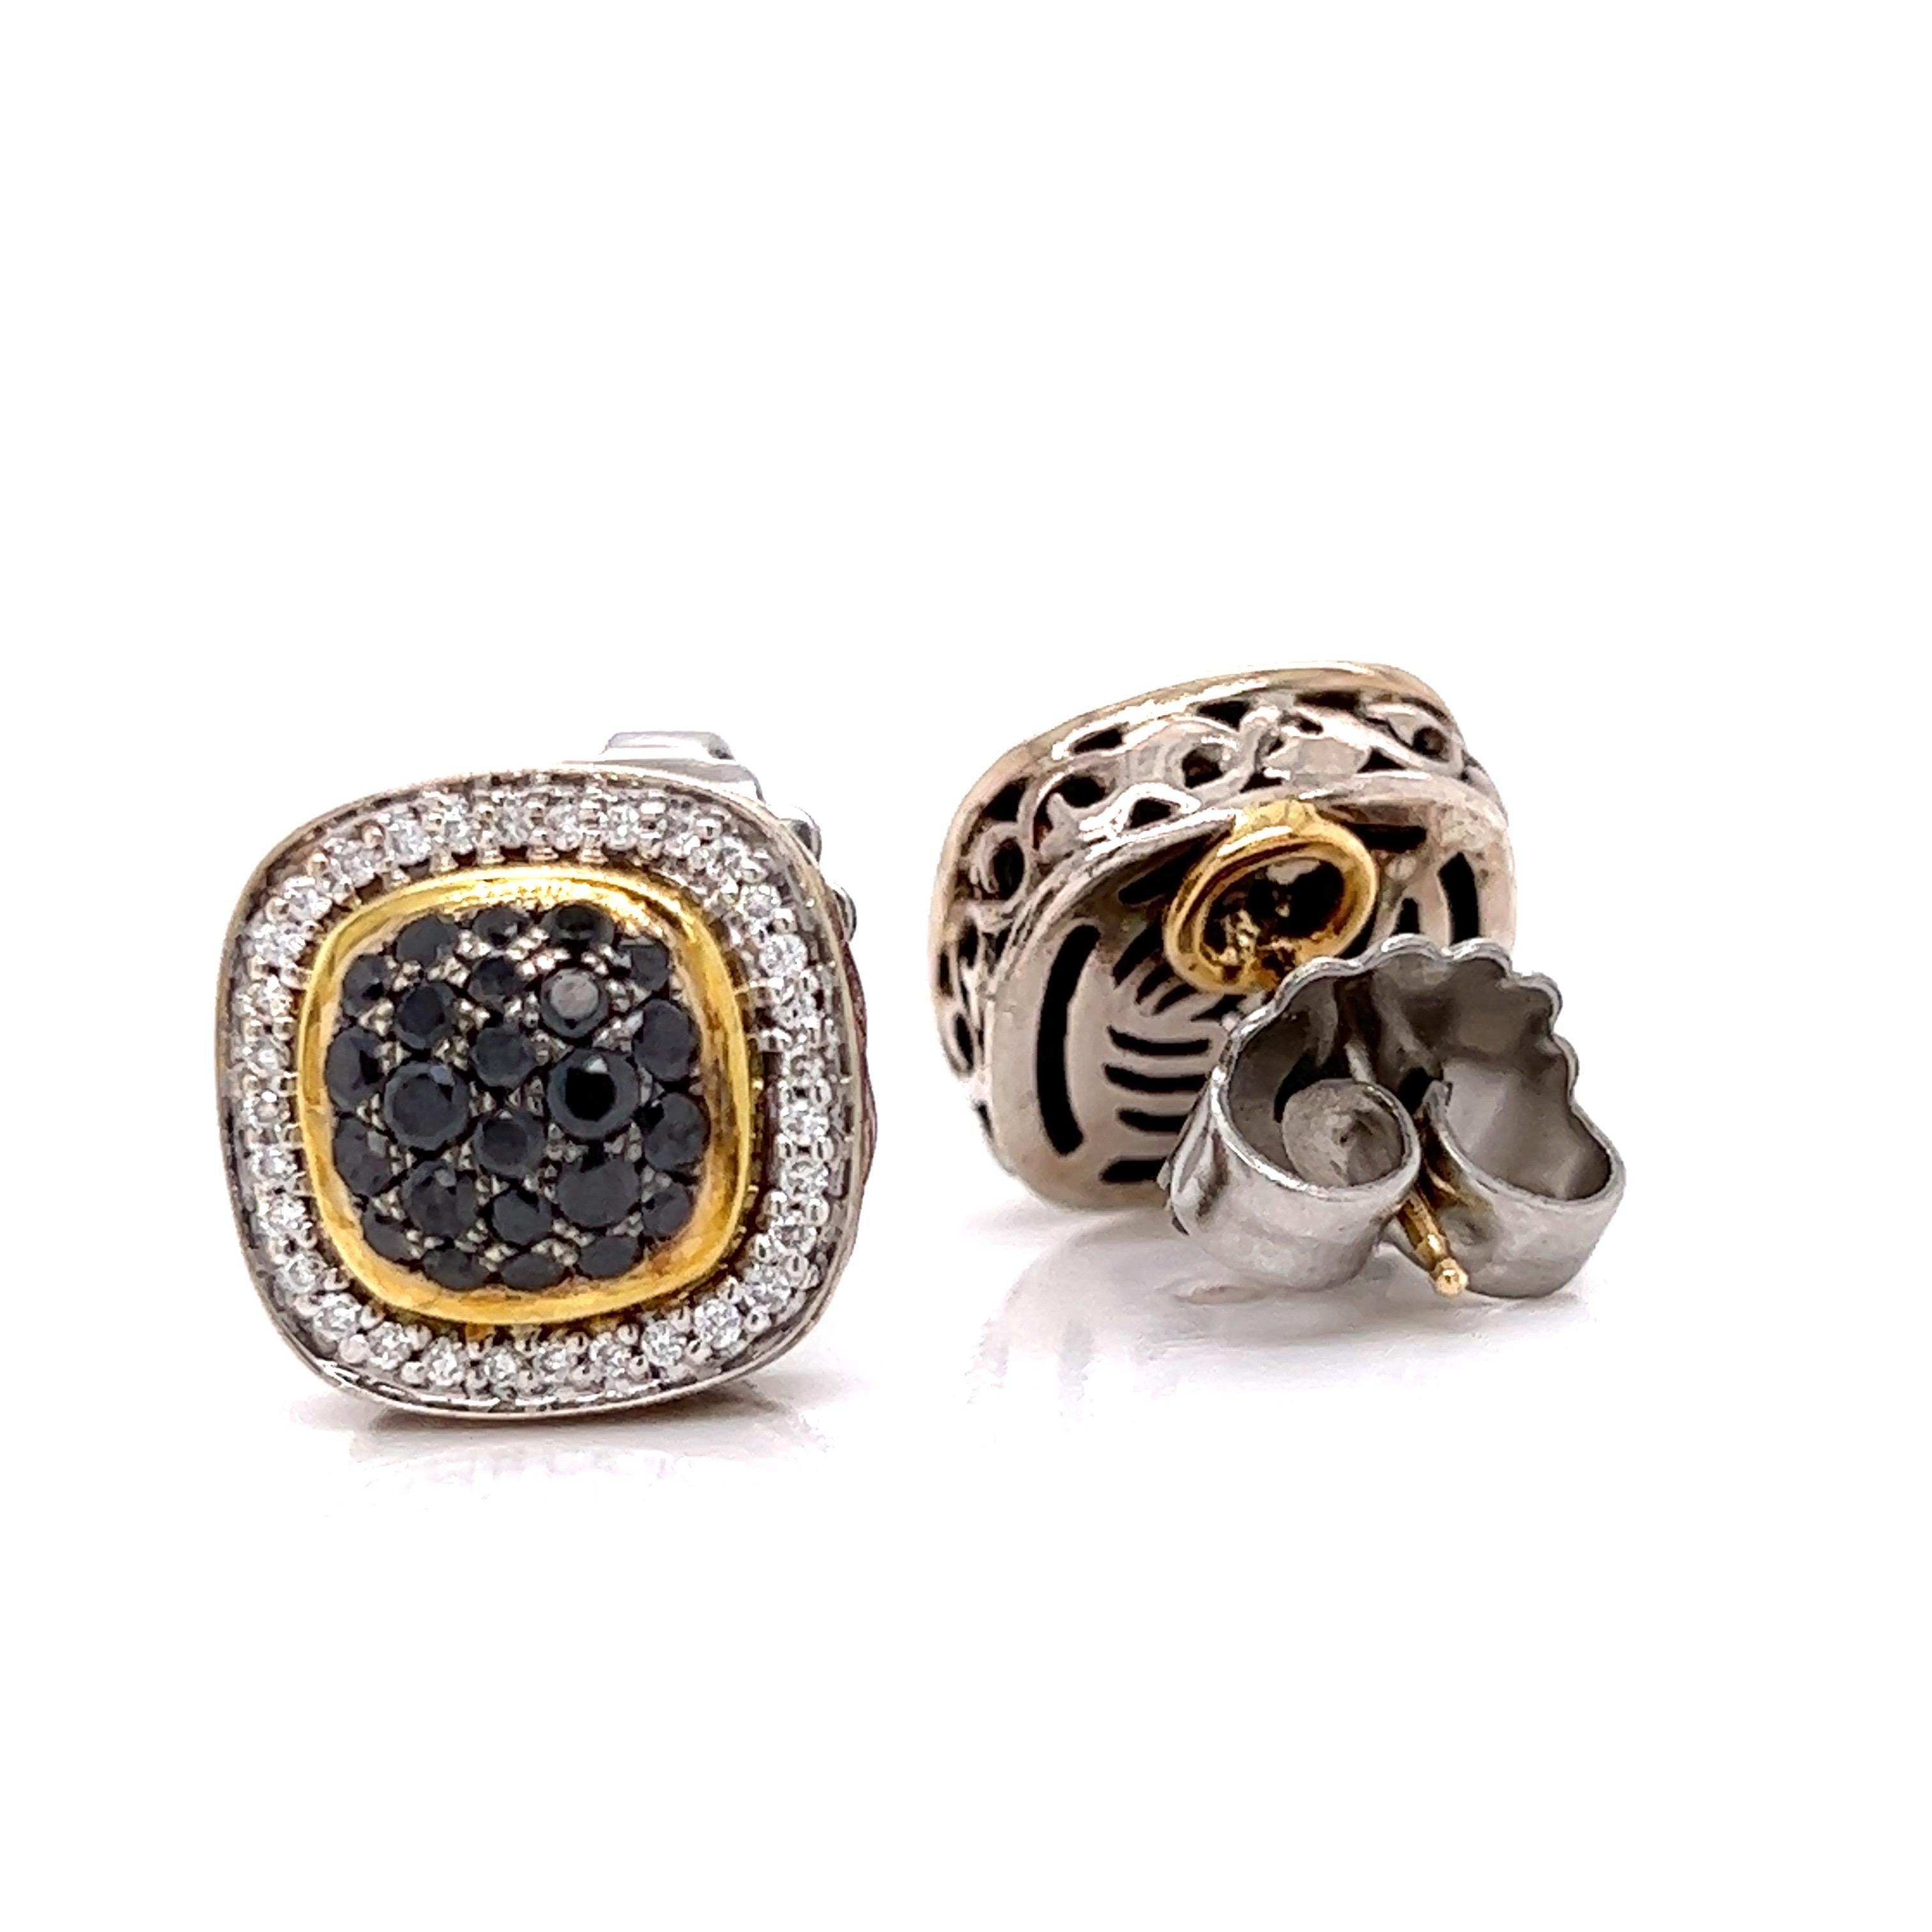 Stunning Charles Krypell estate earrings.  Classic and contrasting with approximately 1.0 ctw black sapphire in the center and approximately 1.0 ctw in SI2-I1 clarity, H-I color white diamonds.   Mounted in sterling silver and 18 Kt yellow gold. 